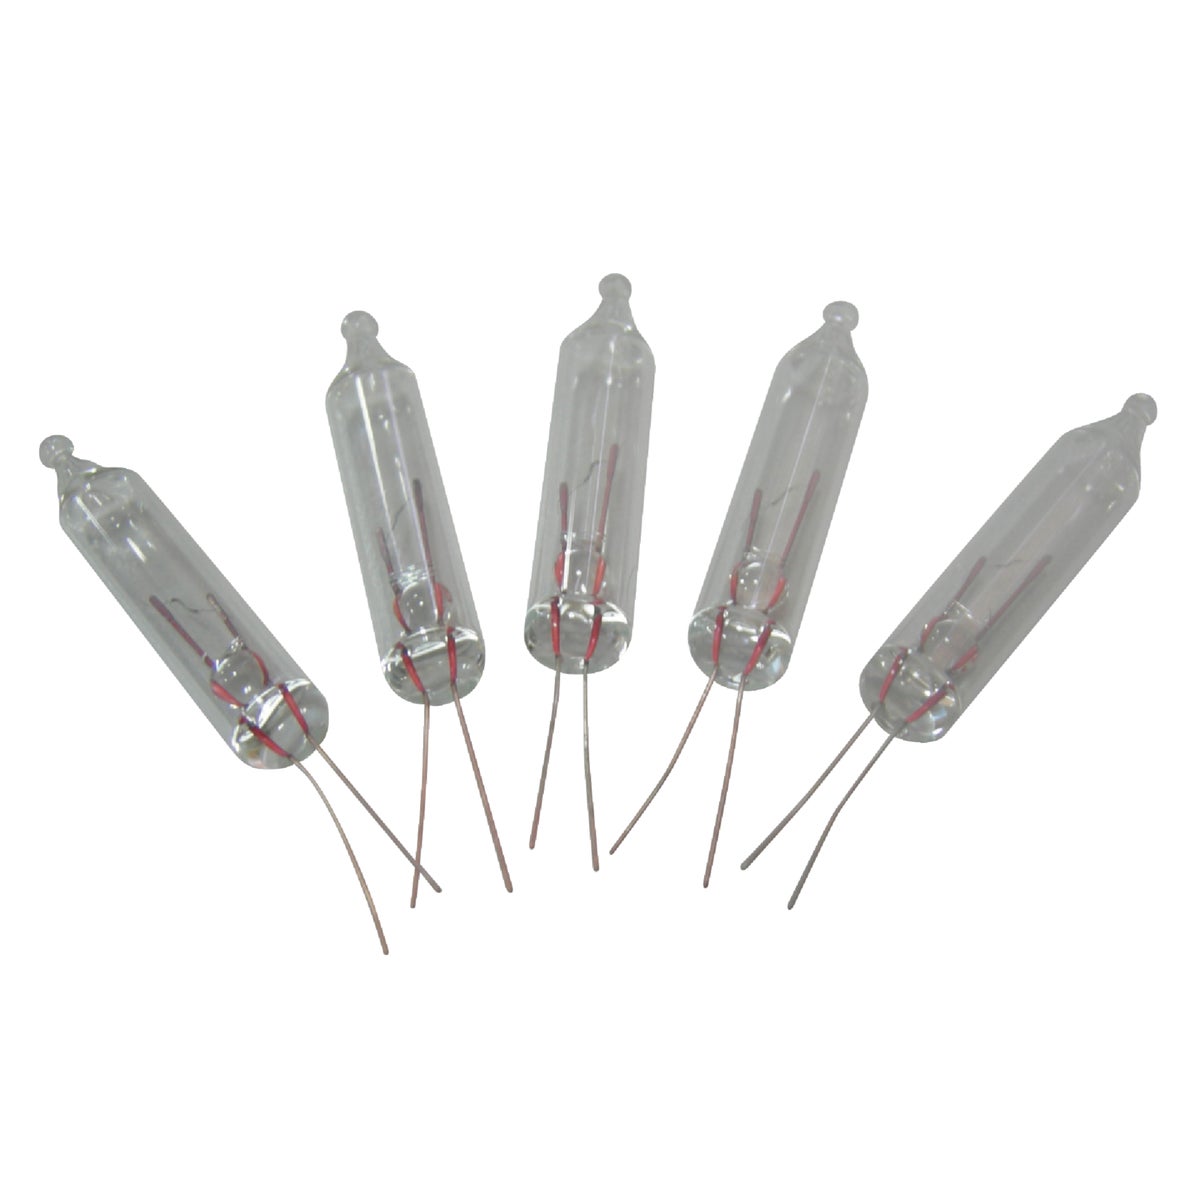 Item 904141, 5-pack heavy-duty clear mini replacement bulb, 2.5V energy efficient, 0.